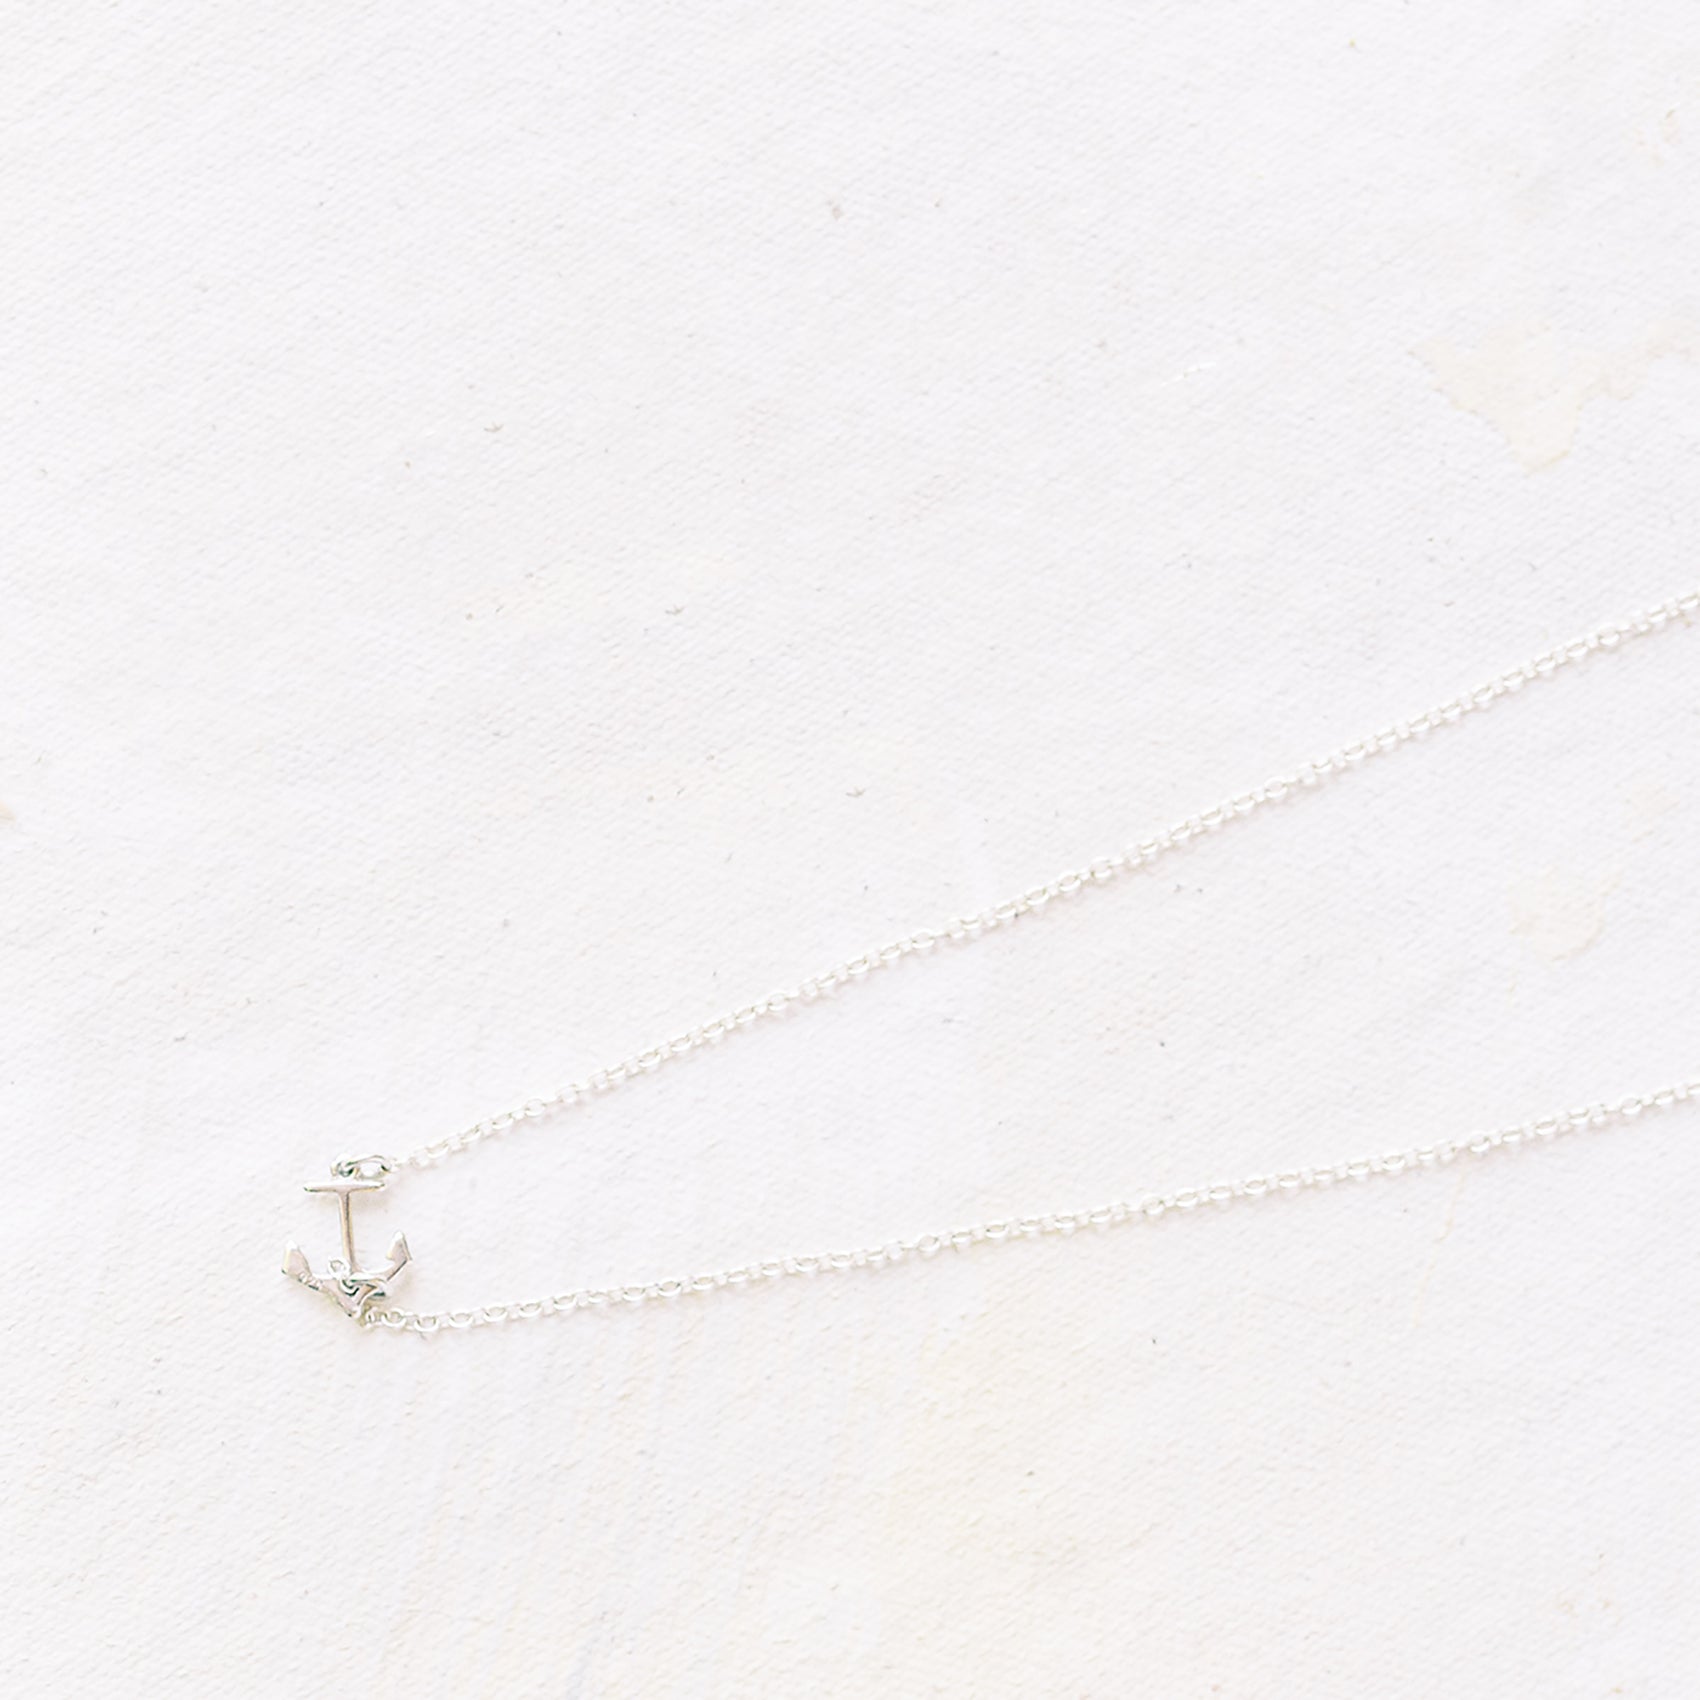 Dainty Silver Anchor Jewelry 